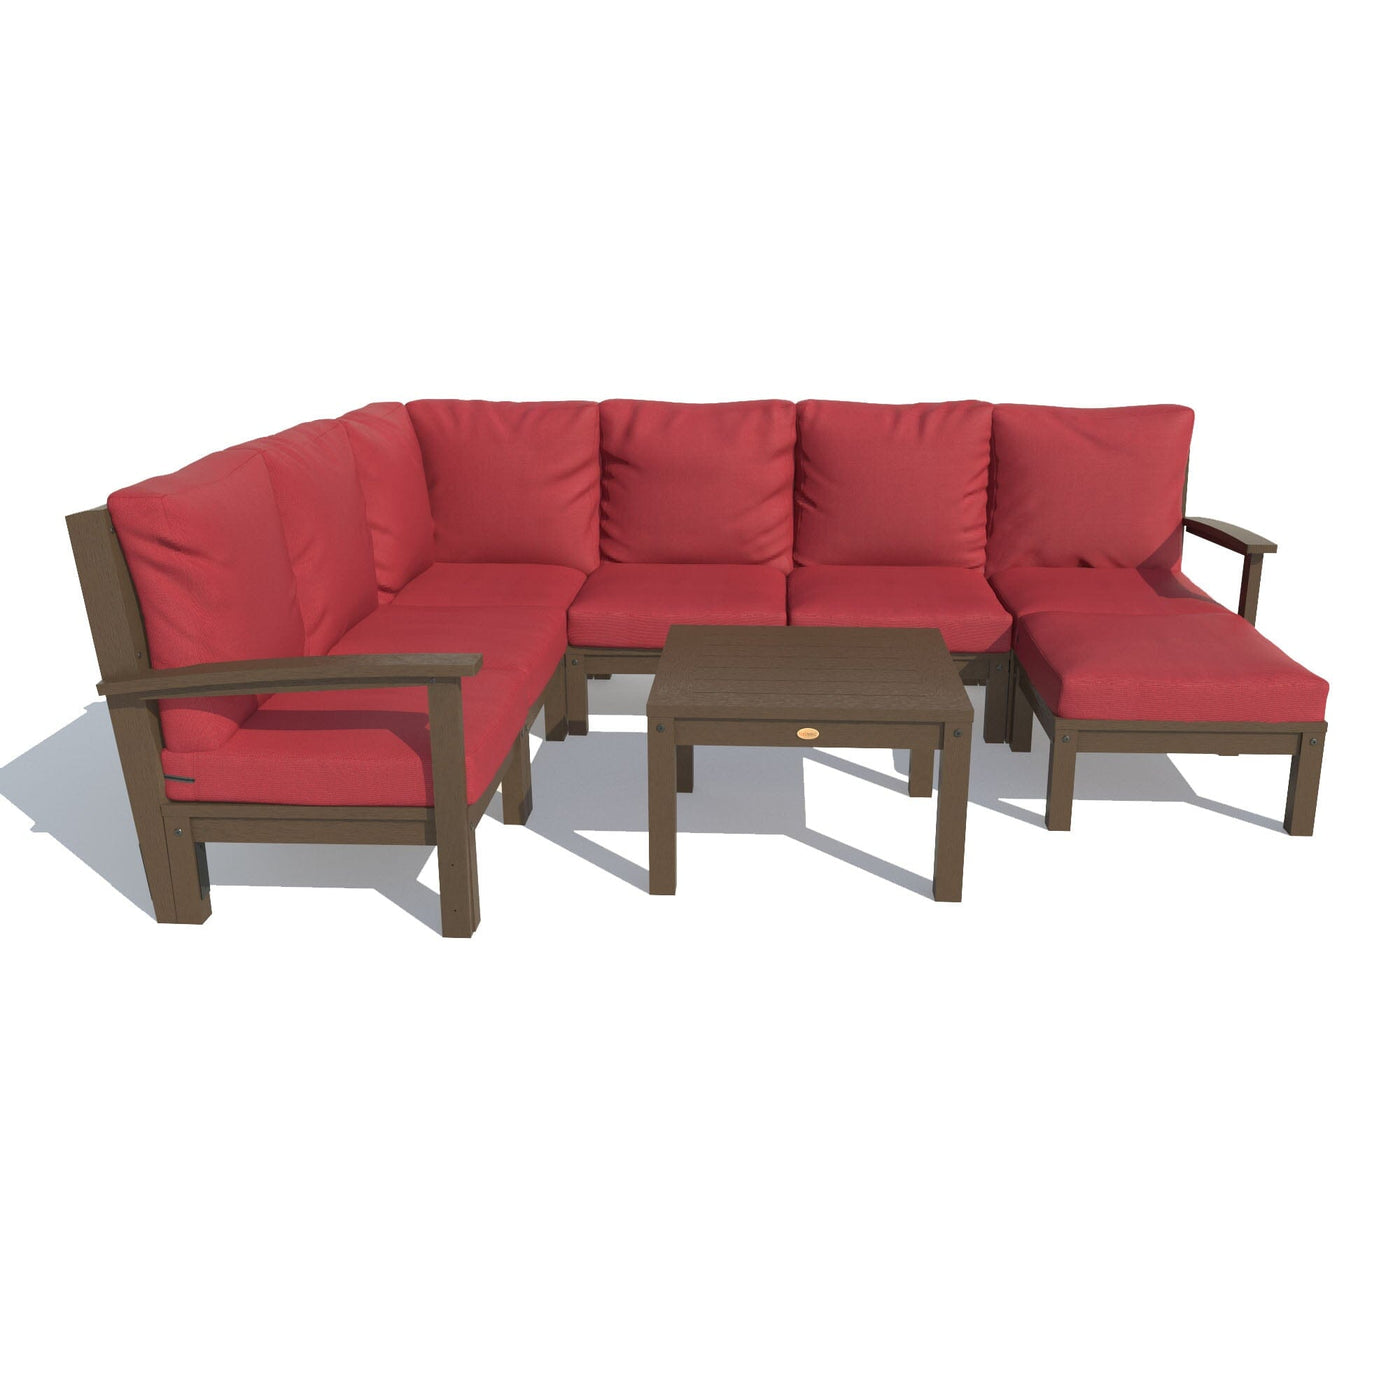 Bespoke Deep Seating: 8 Piece Sectional Sofa Set with Ottoman and Side Table Deep Seating Highwood USA Firecracker Red Weathered Acorn 